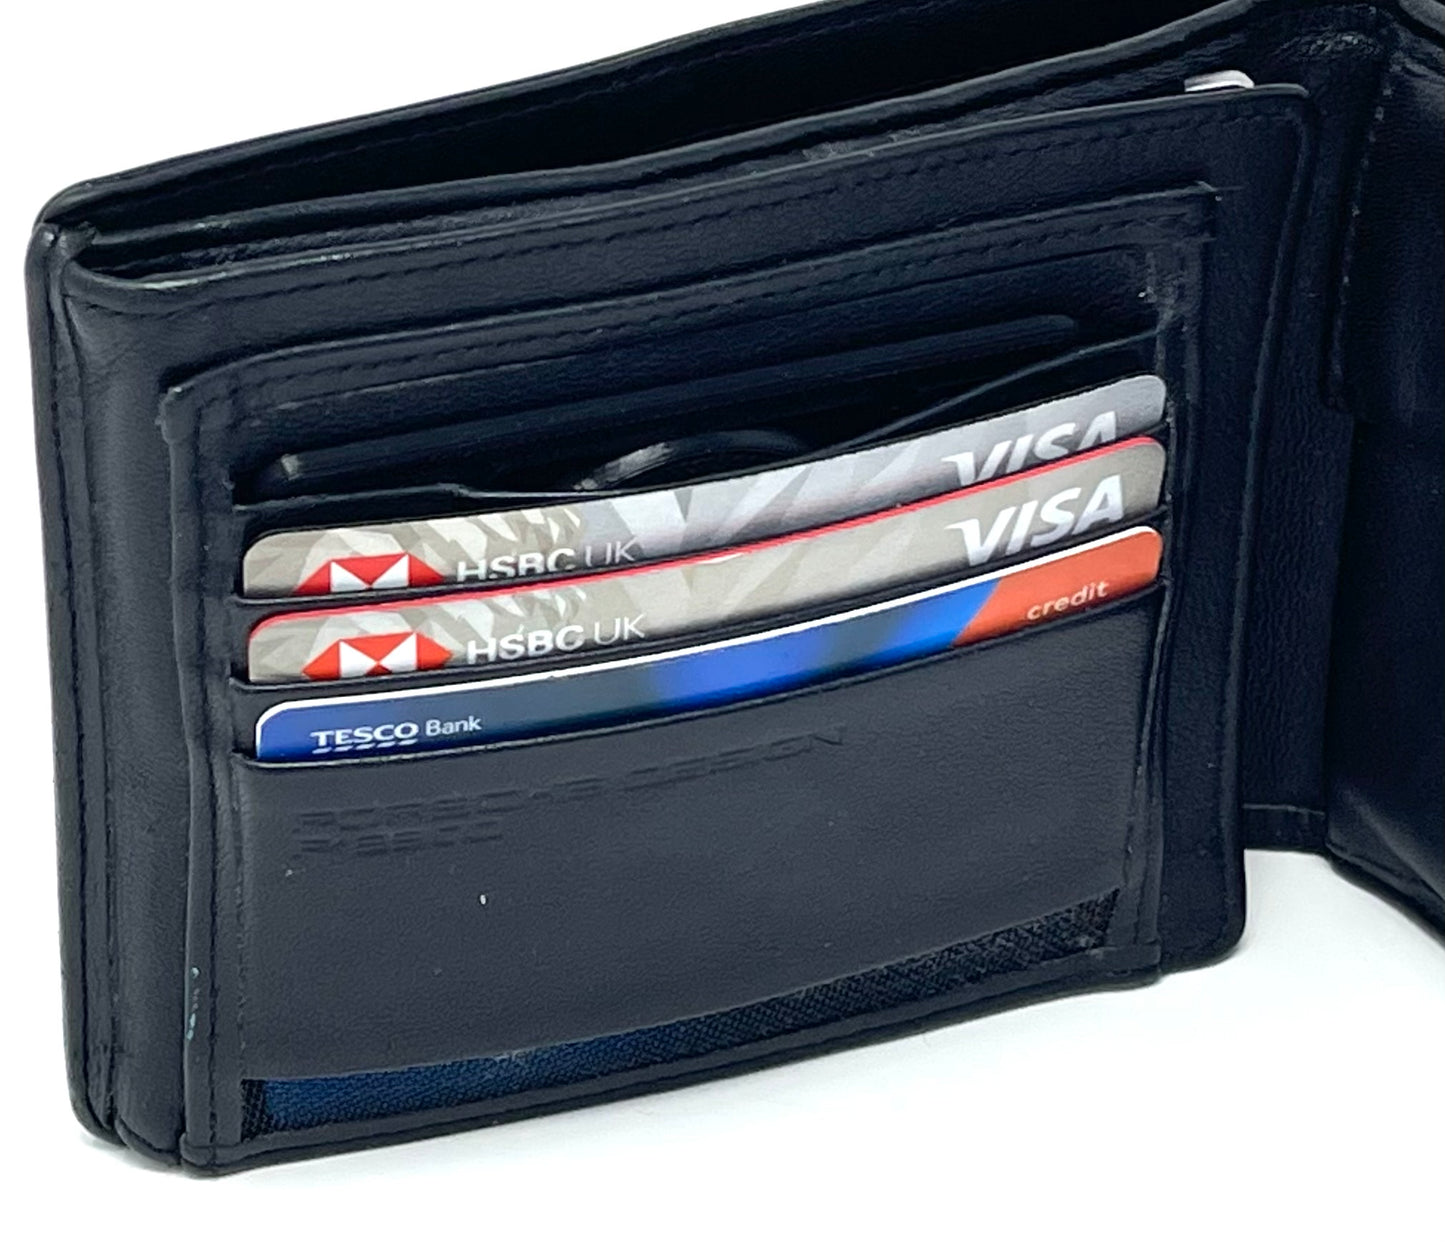 Apple AirTag Credit Card Sized Wallet/Purse/Clutch Bag Holder